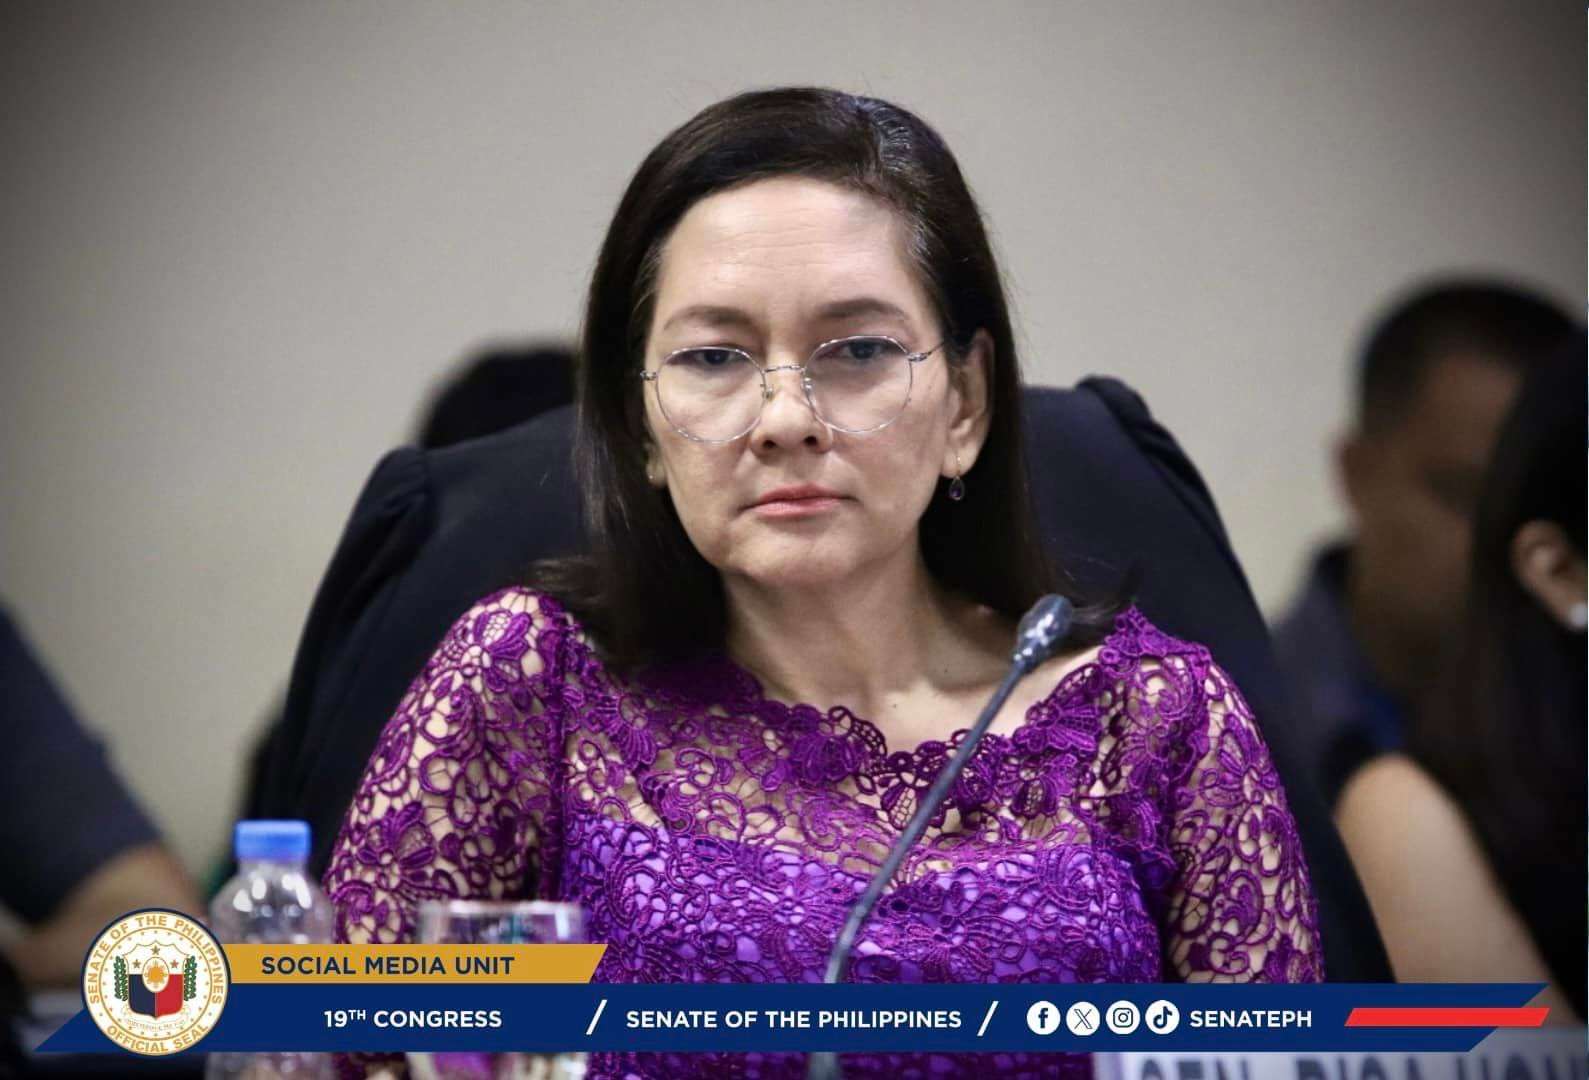 Hontiveros suspects Guo for stealing an identity